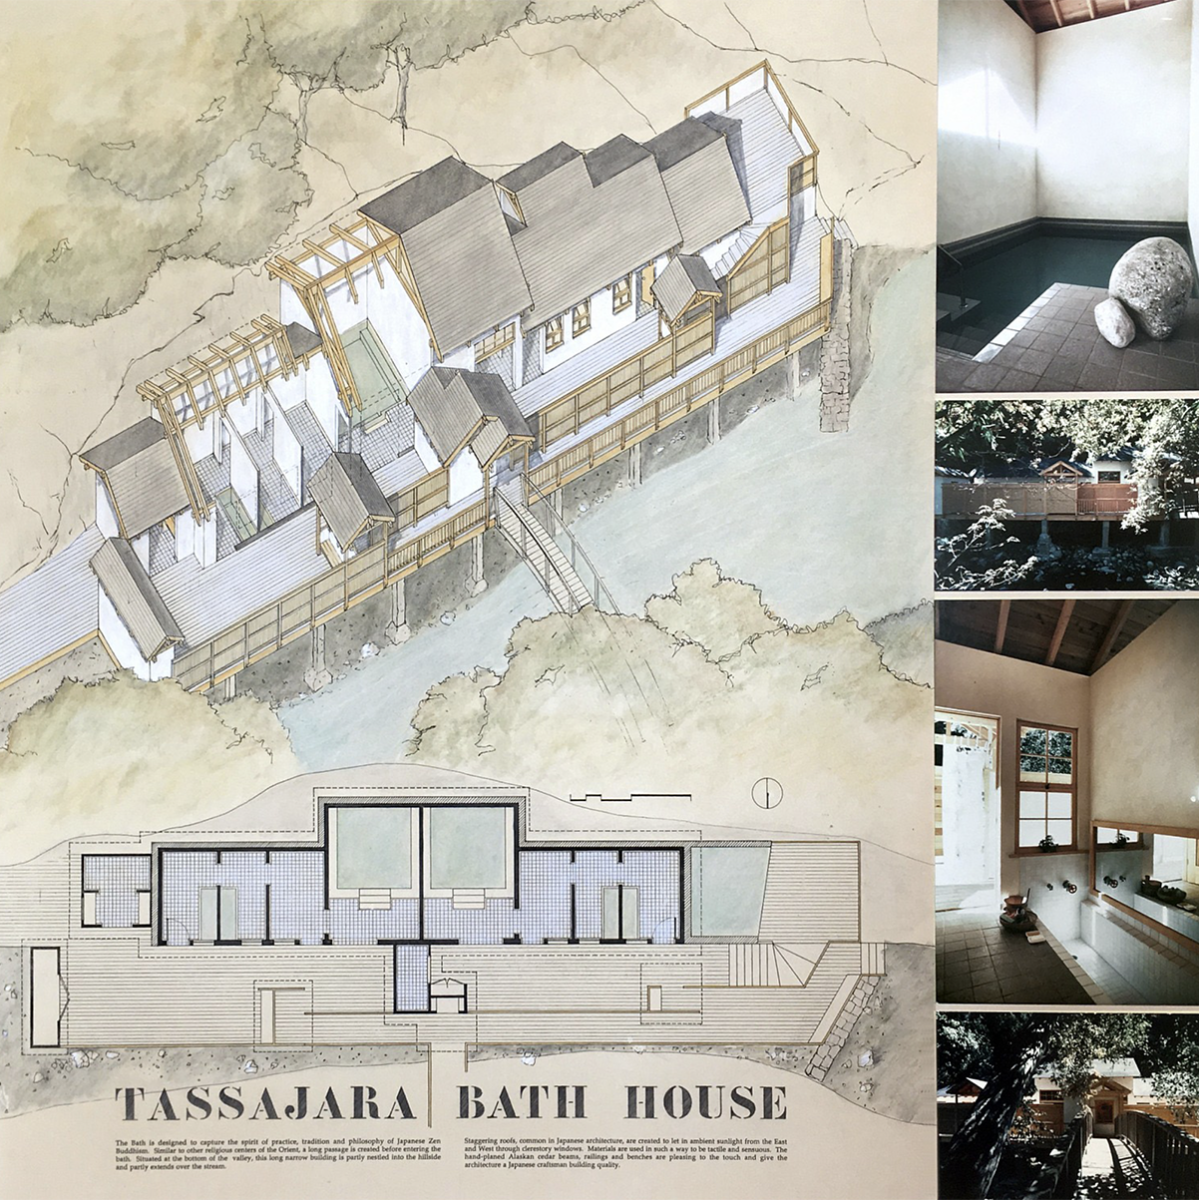 architecture design plan with a vertical strip of images of interiors of a bathhouse building